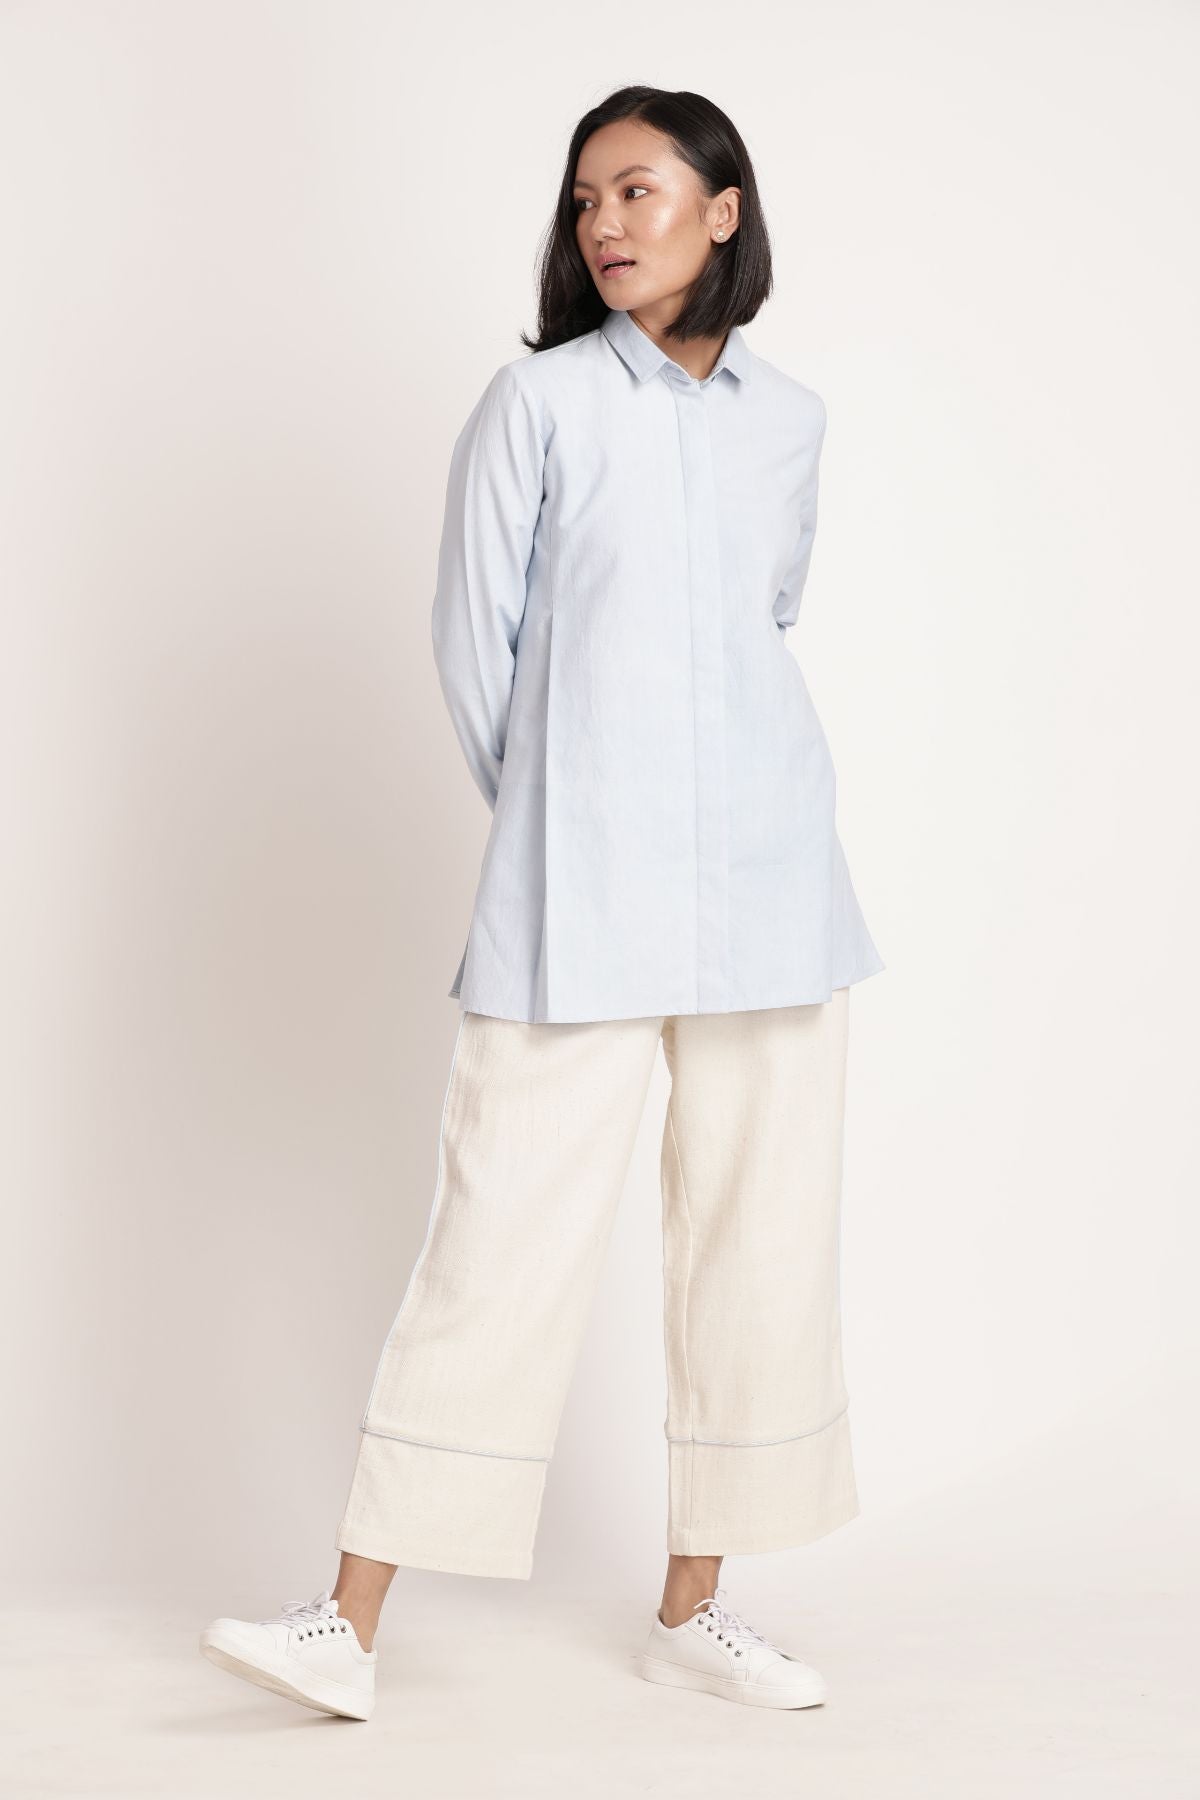 Blue Sora Beju Set by Itya with Blue, Co-ord Sets, Hand Spun Cotton, Handwoven cotton, Natural, Off-white, Office, Office Wear, Office Wear Co-ords, Pastel Perfect, Pastel Perfect by Itya, Plant Dye, Relaxed Fit, Solids, SS22, Womenswear at Kamakhyaa for sustainable fashion